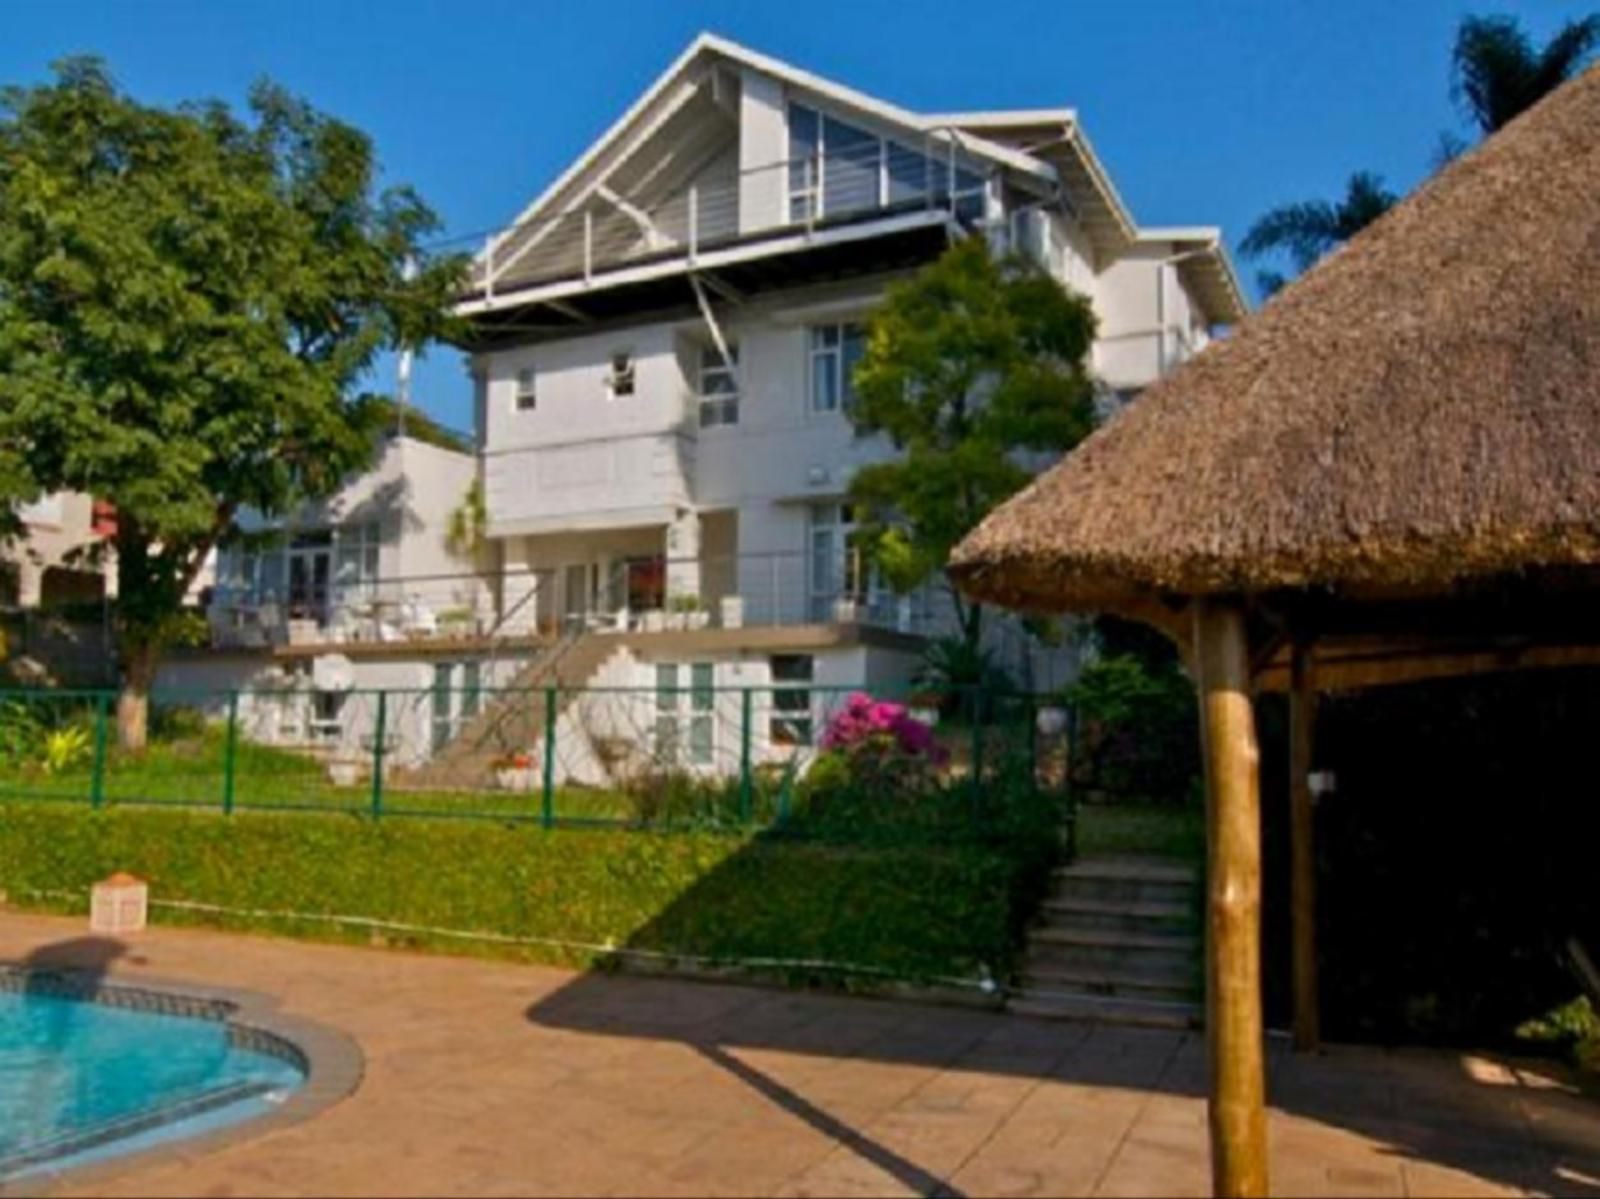 The Grange Guest House Durban North Durban Kwazulu Natal South Africa House, Building, Architecture, Swimming Pool